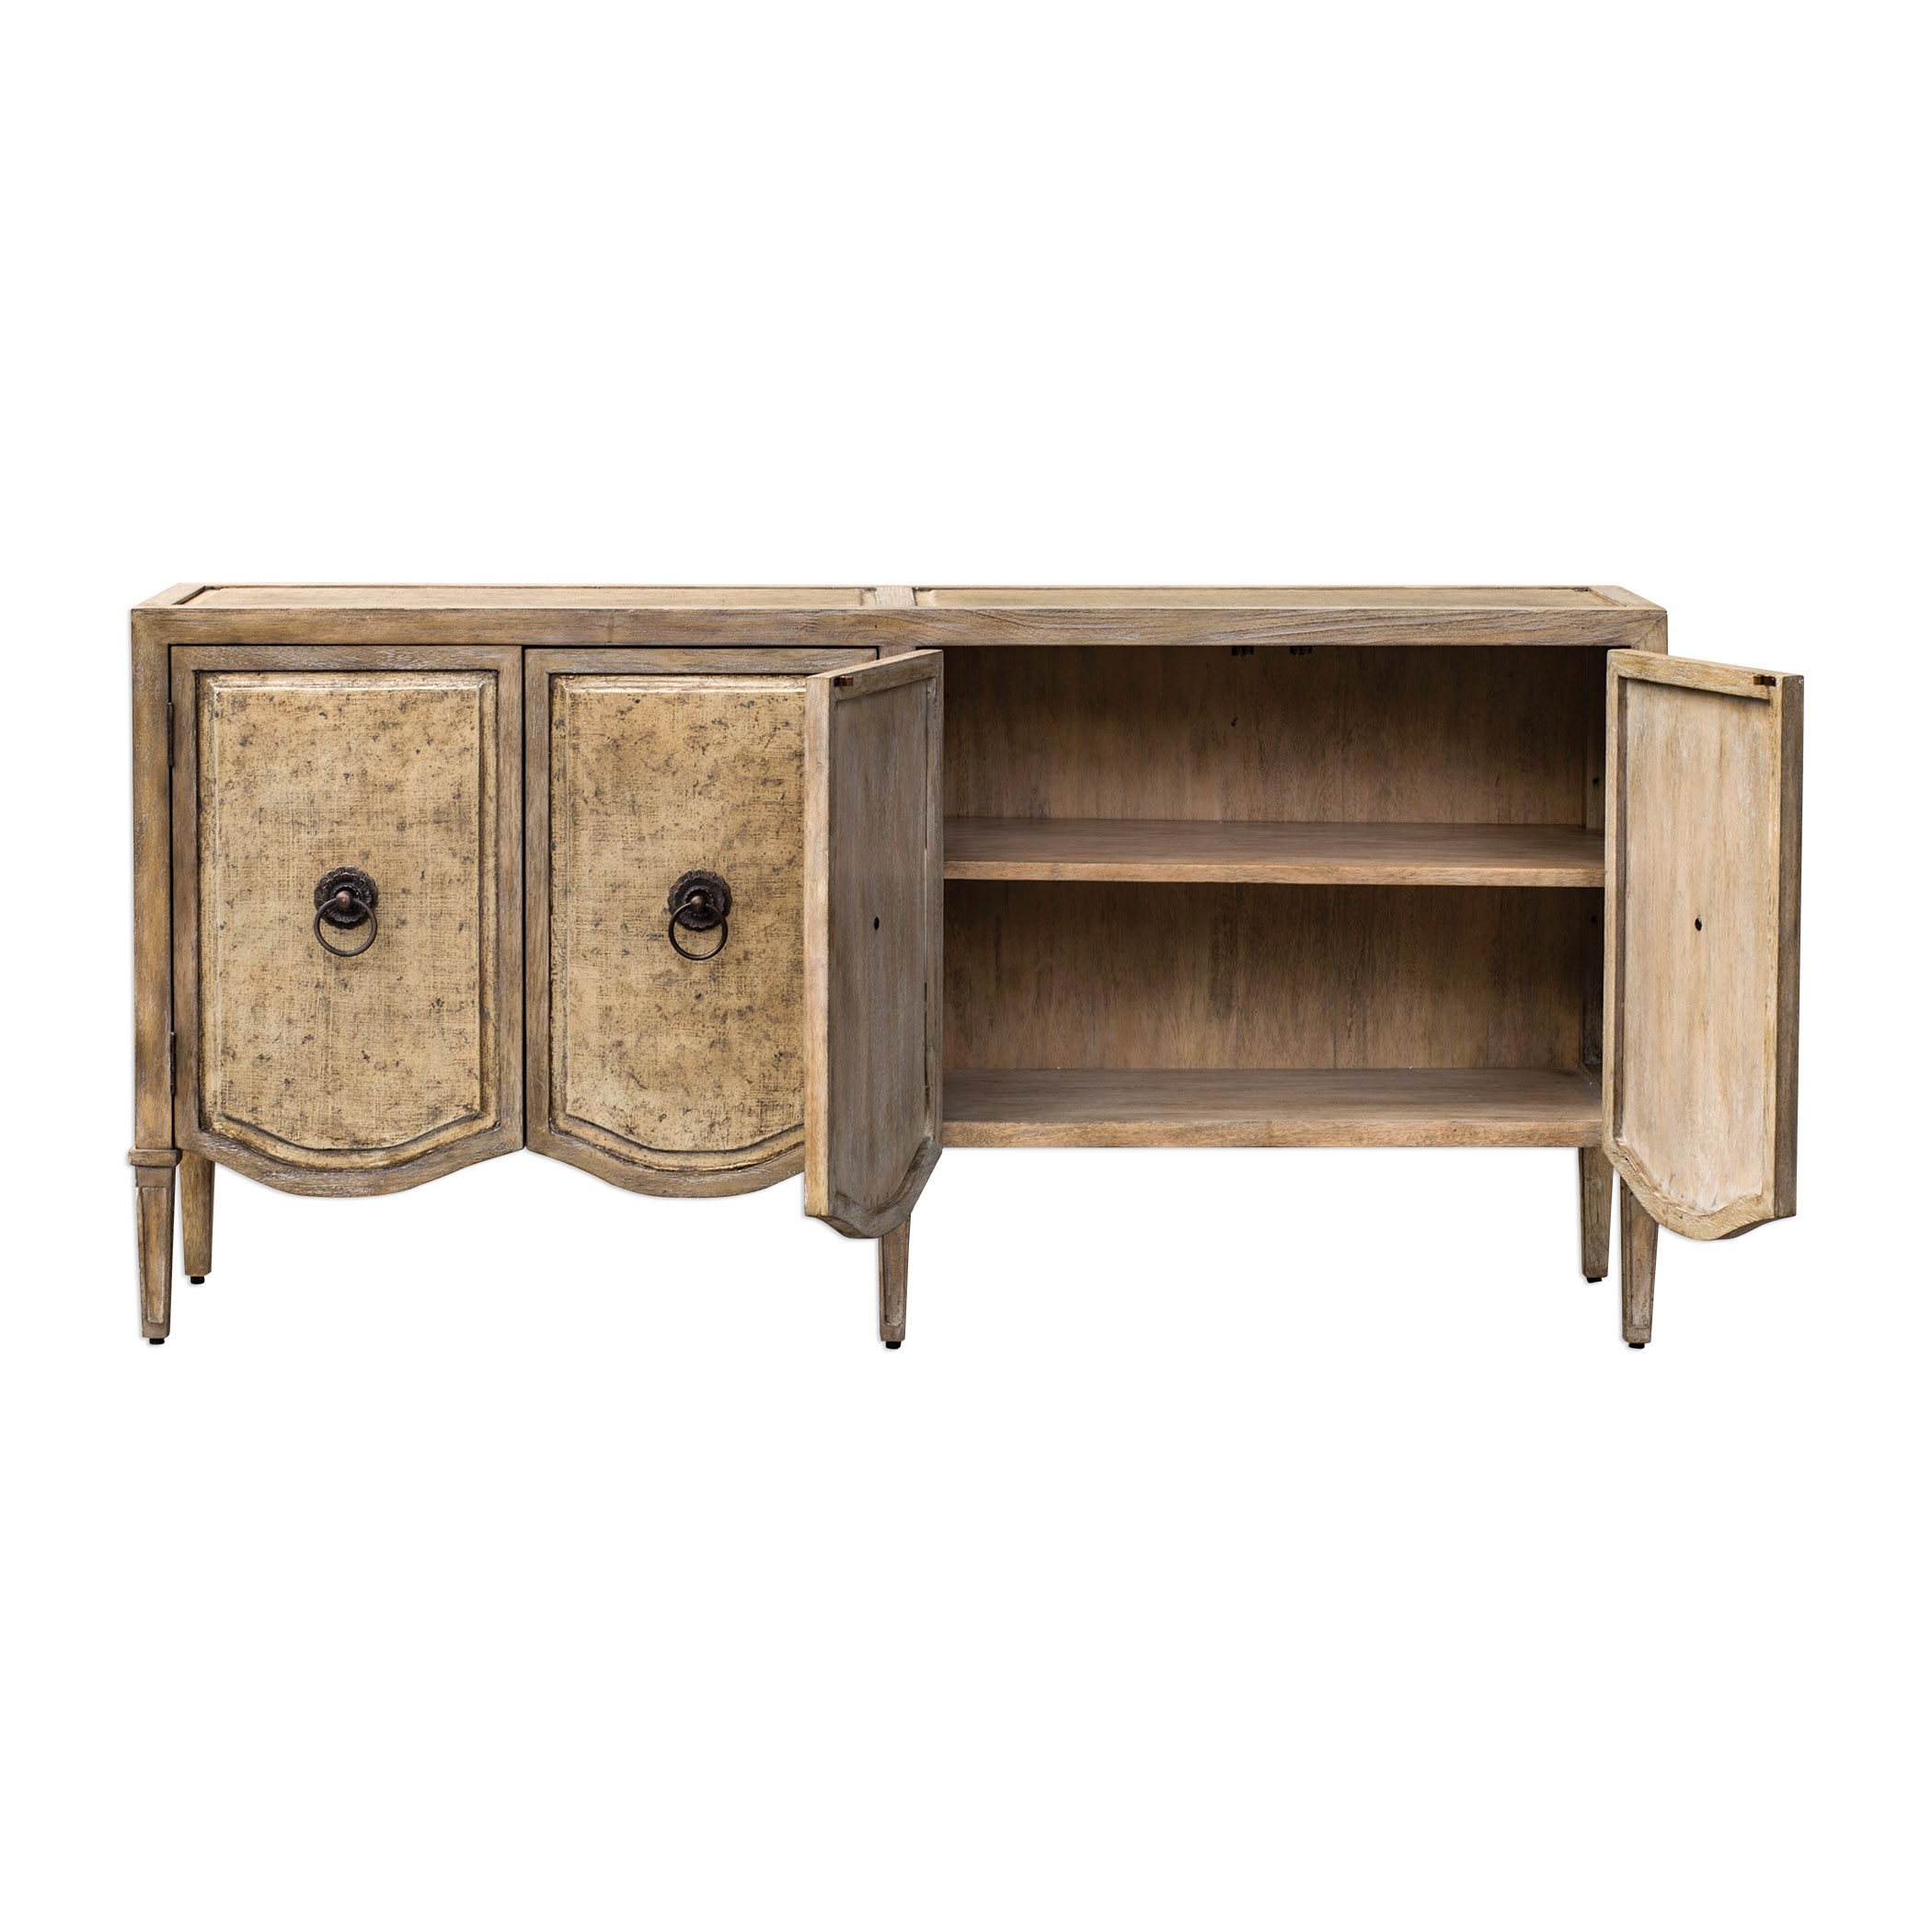 Thina Champagne Console Cabinet - Image 5